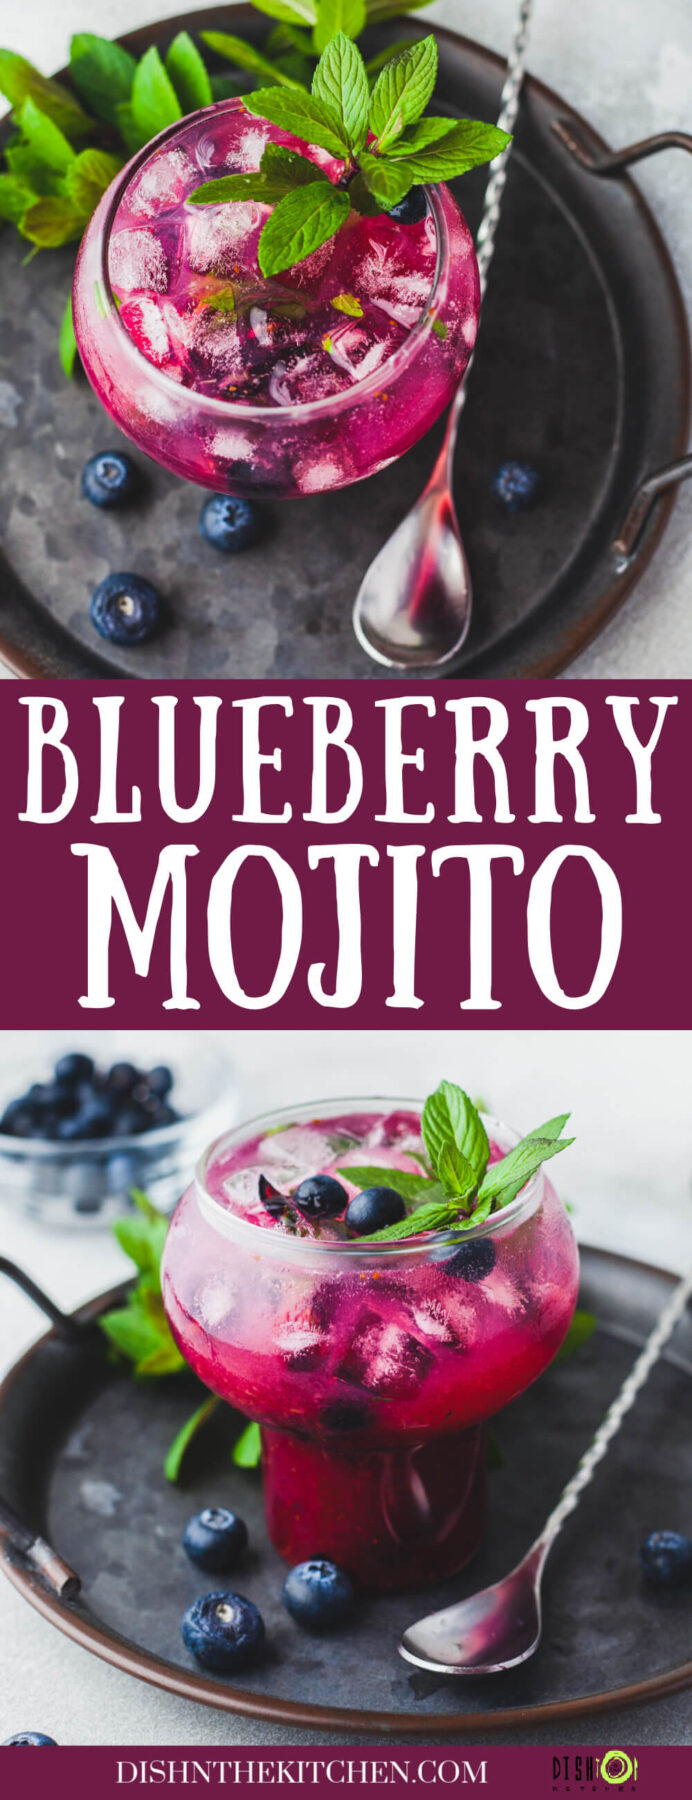 Pinterest image of a vibrant purple Blueberry Mojito Cocktail garnished with fresh mint sits on a dark metal tray.